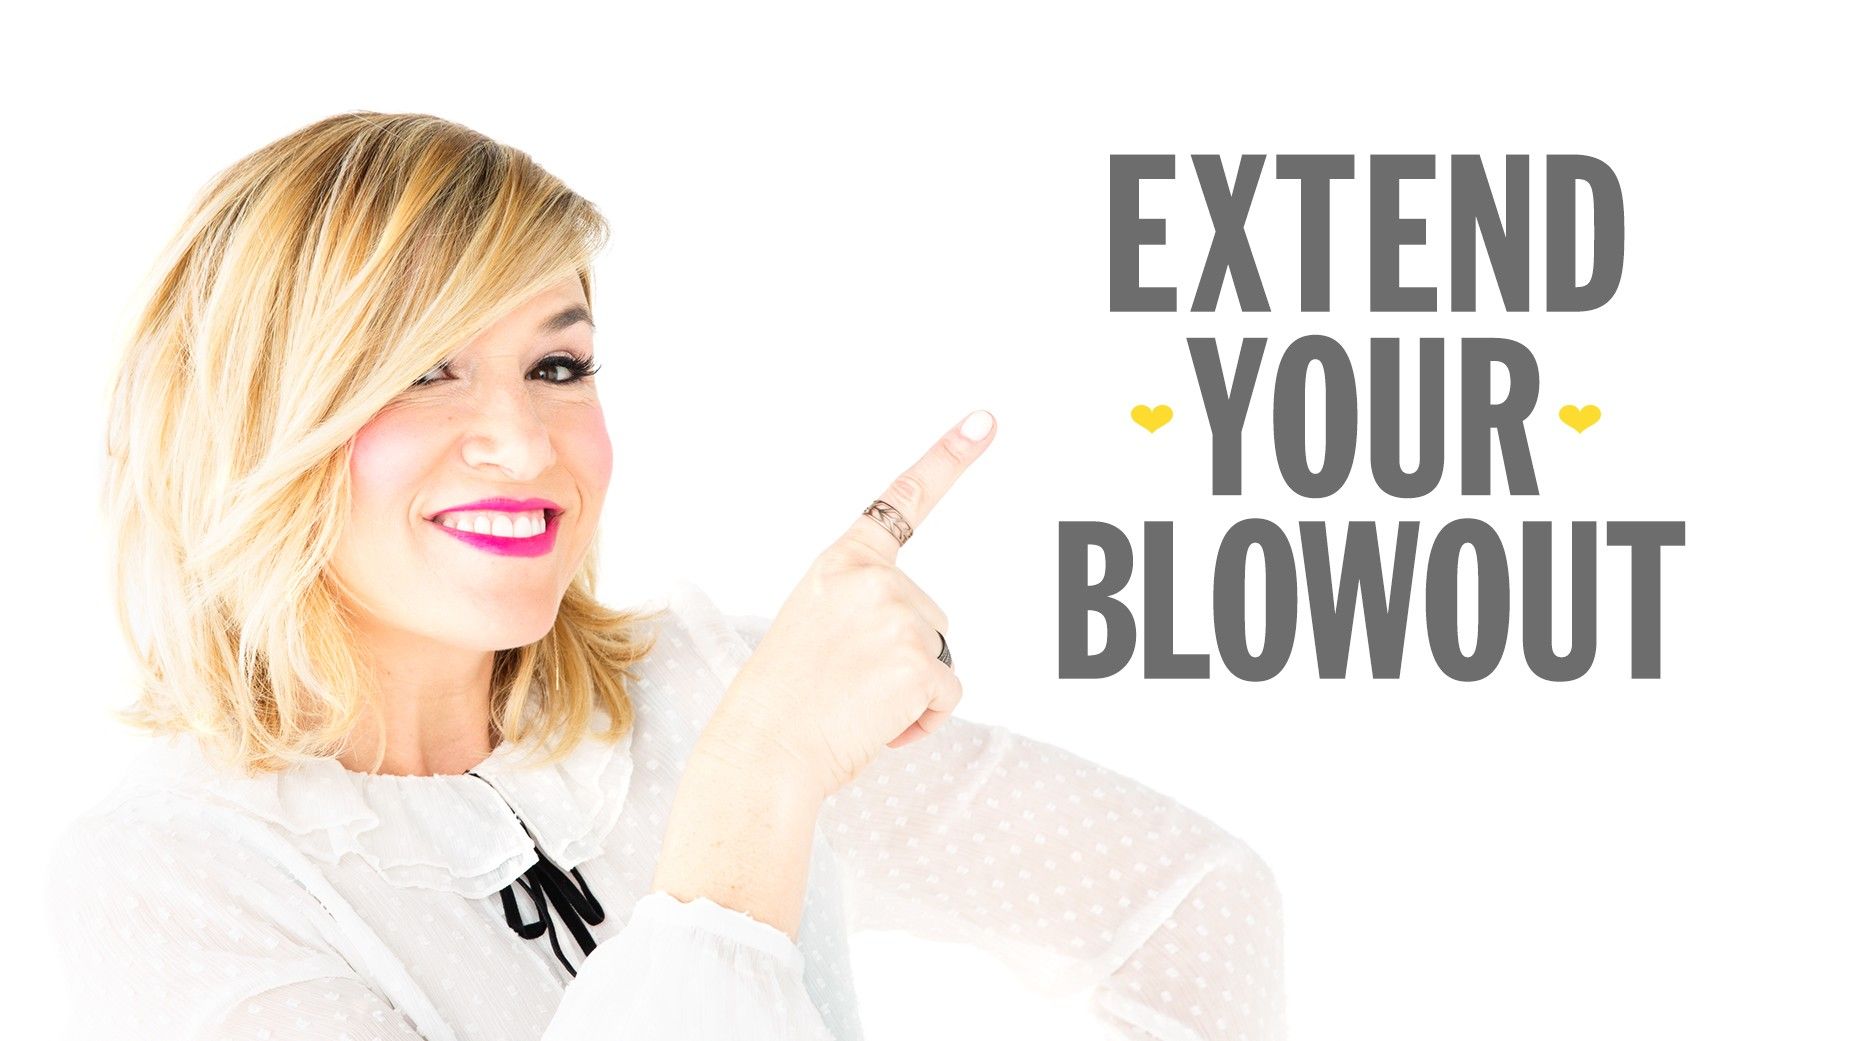 Video - How To Make Your Blowout Last | Drybar